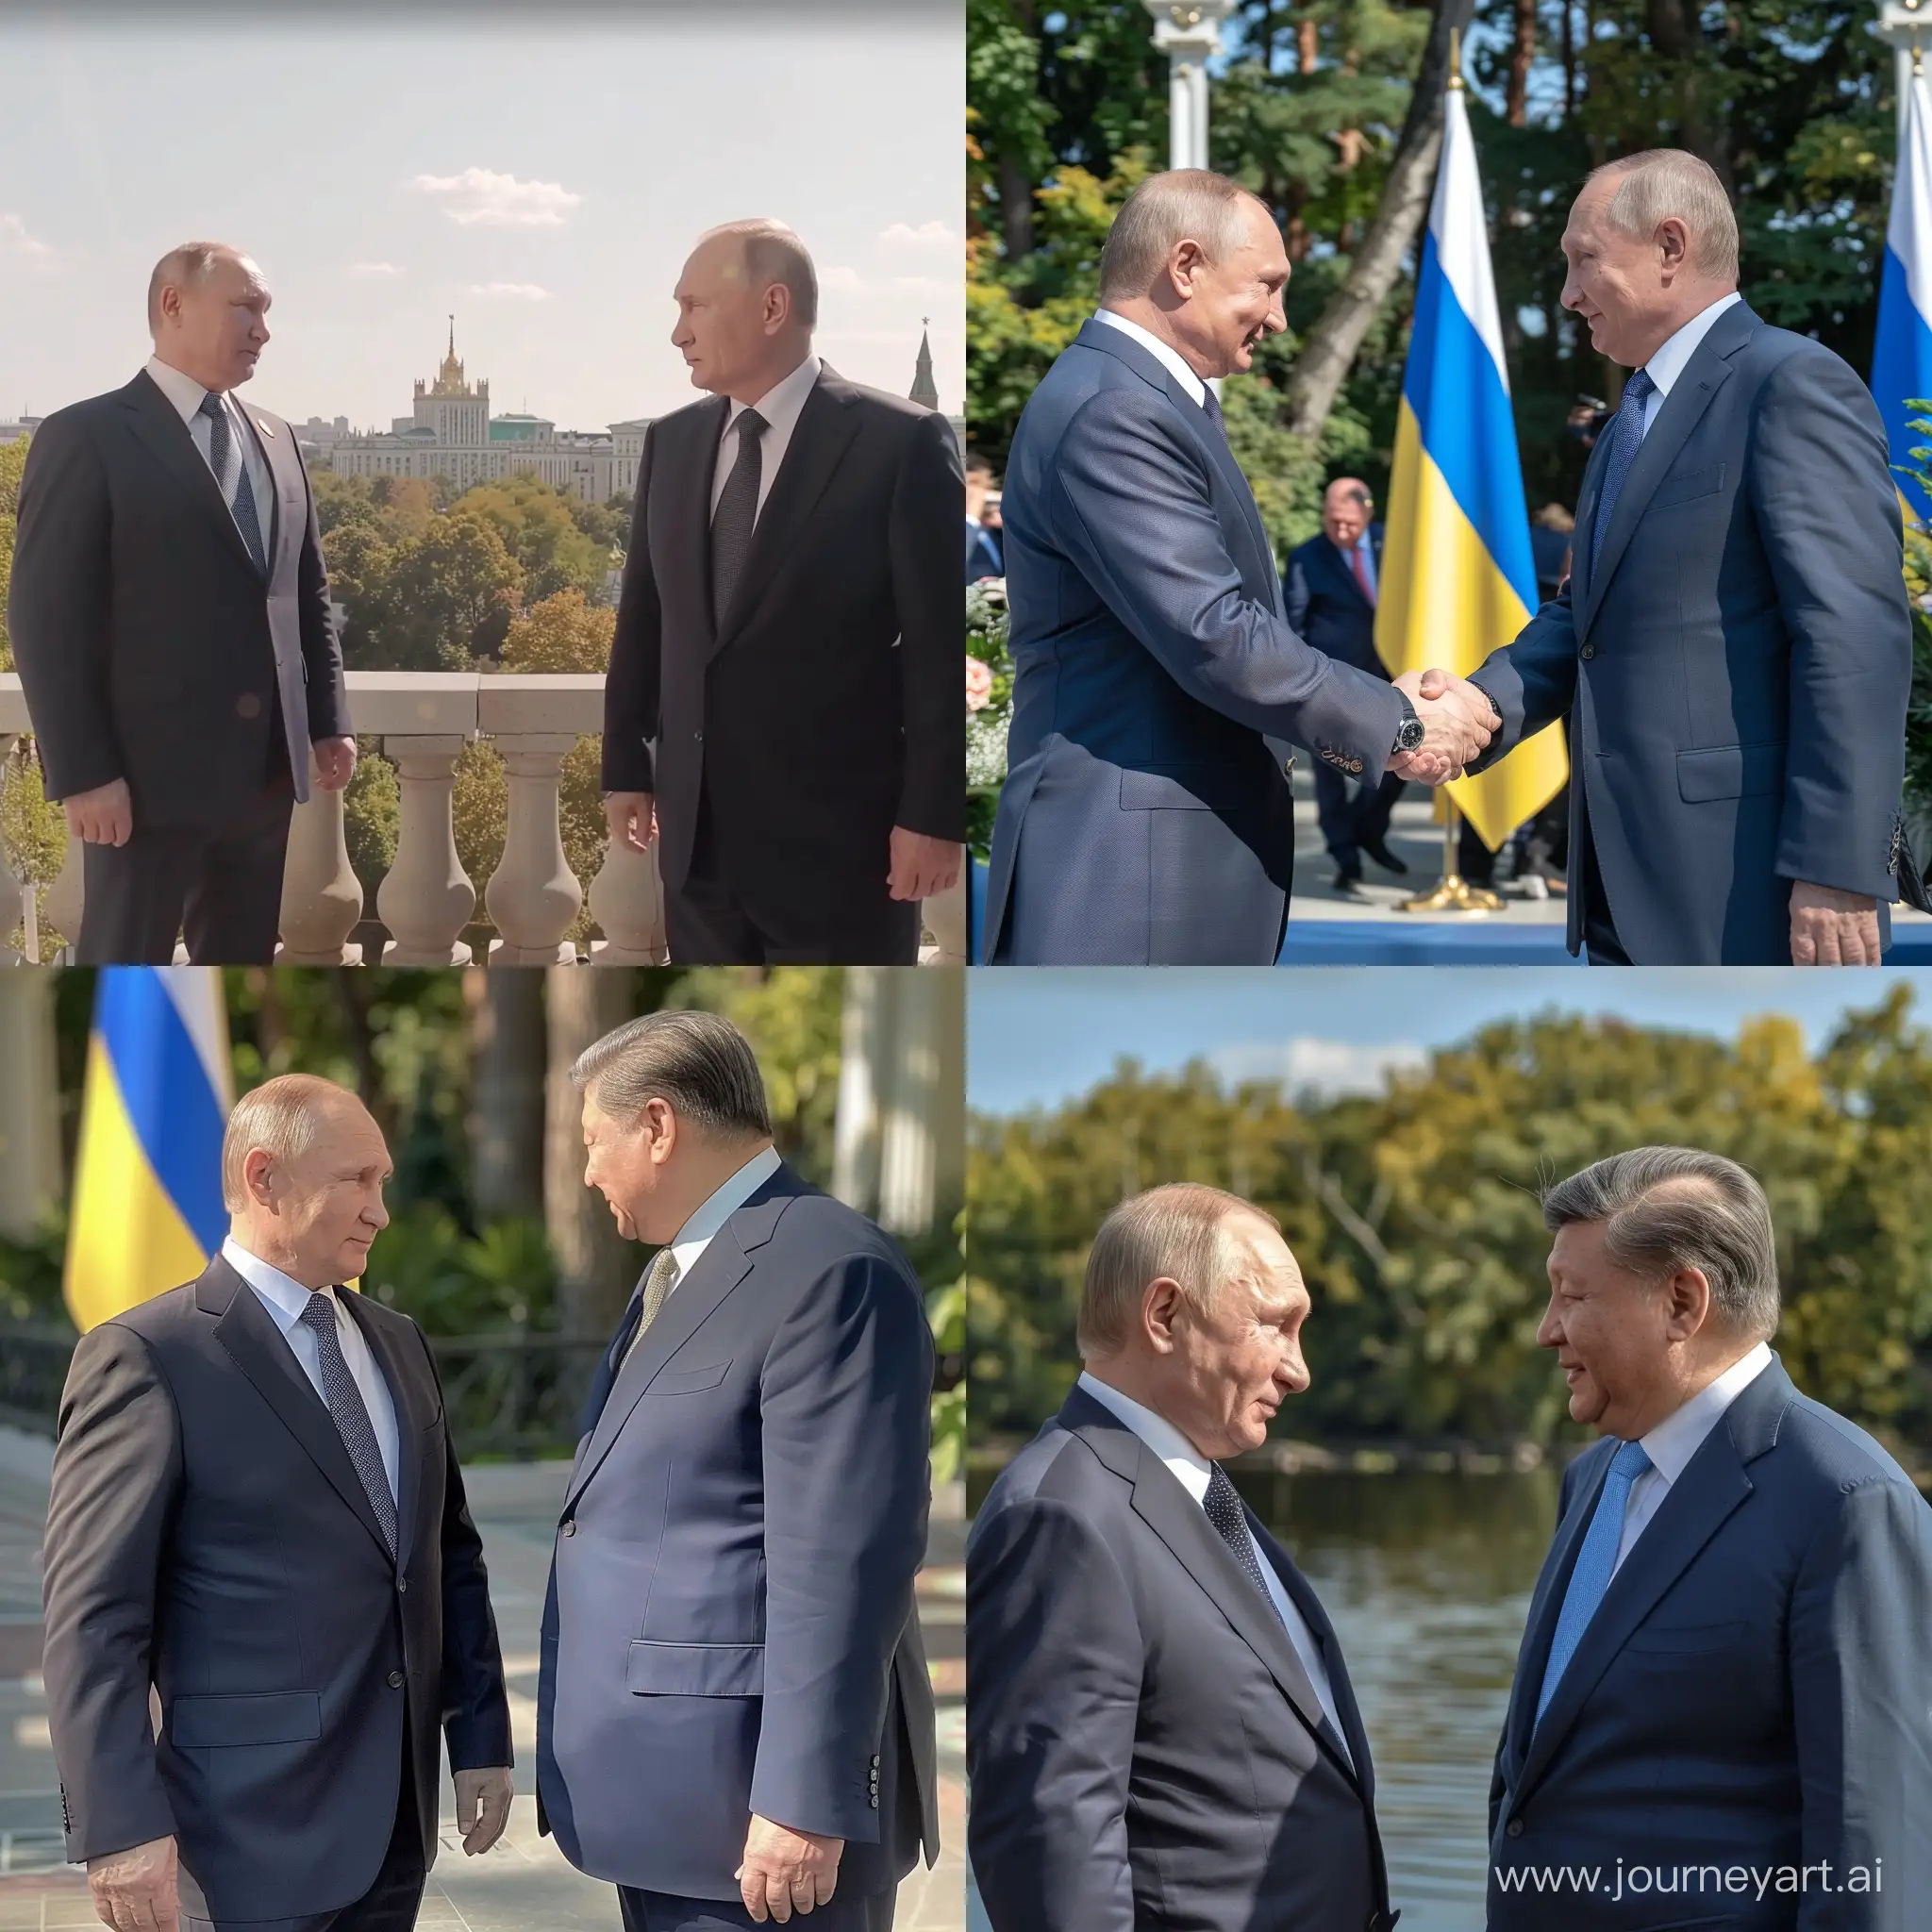 Presidents-of-Russia-and-Ukraine-Meeting-Accidental-Encounter-in-Sunlit-Ambiance